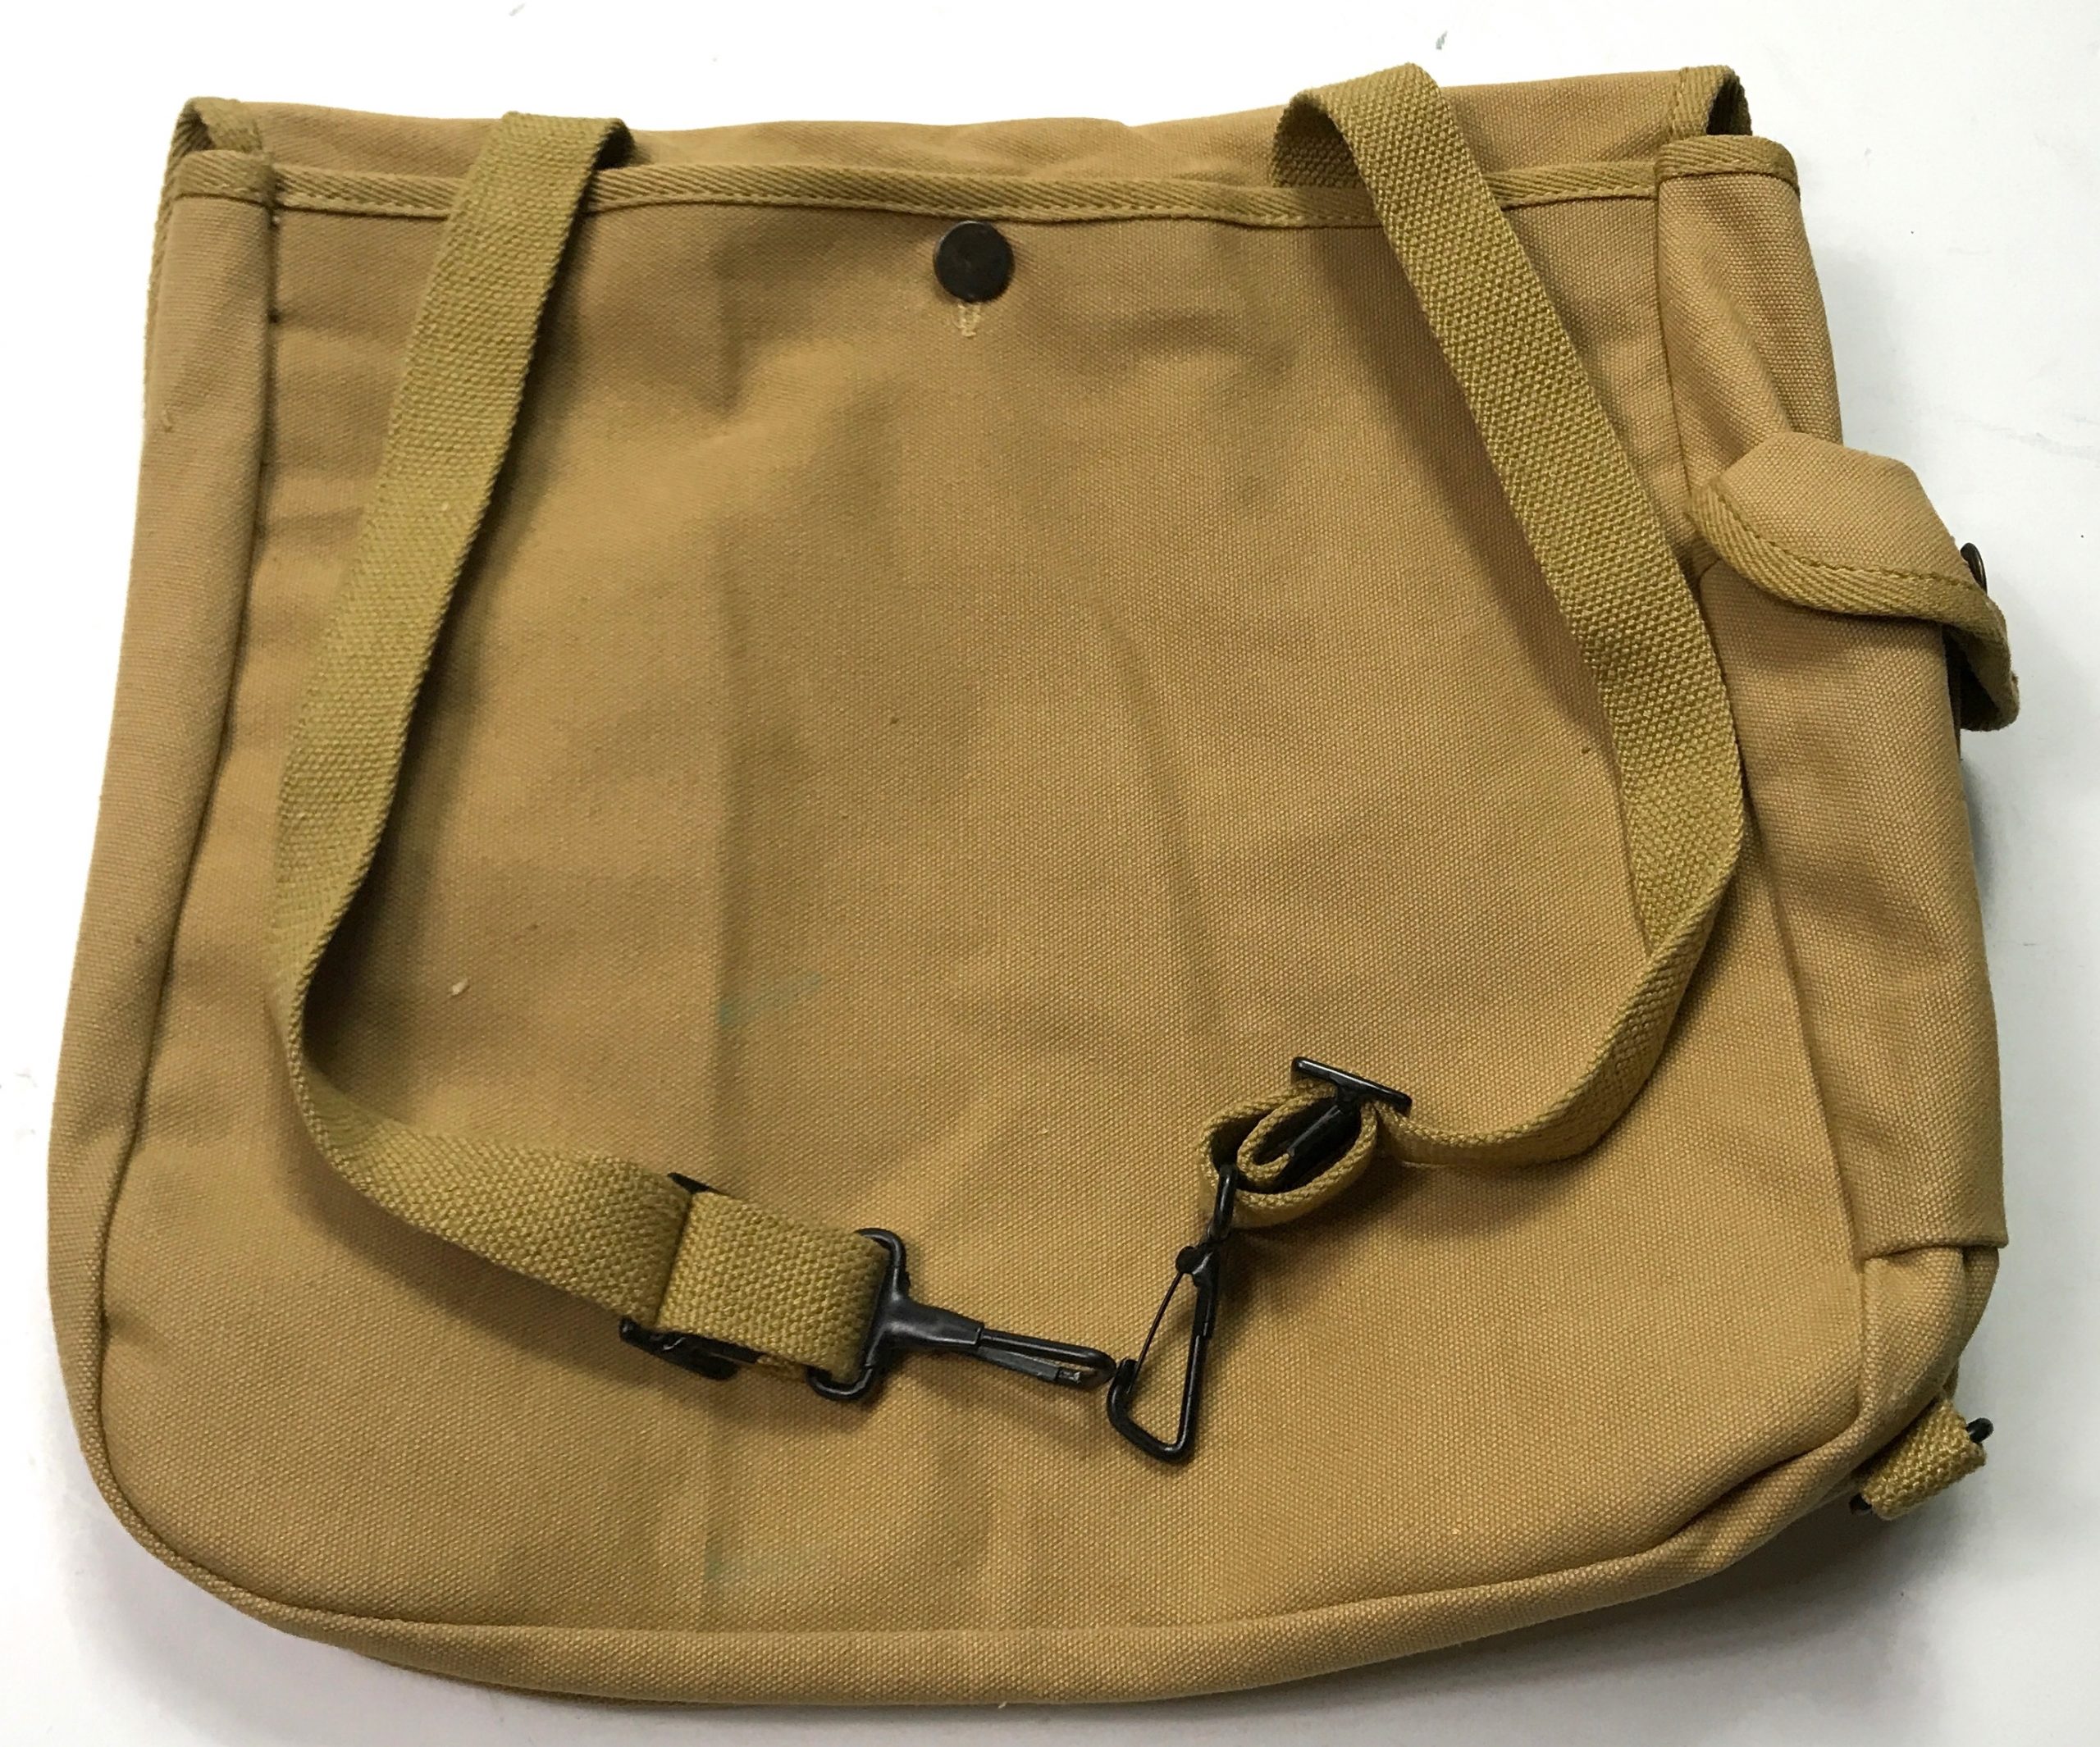 M36 musette bag 1943 - Doughboy Military Collectables Springfield Missouri